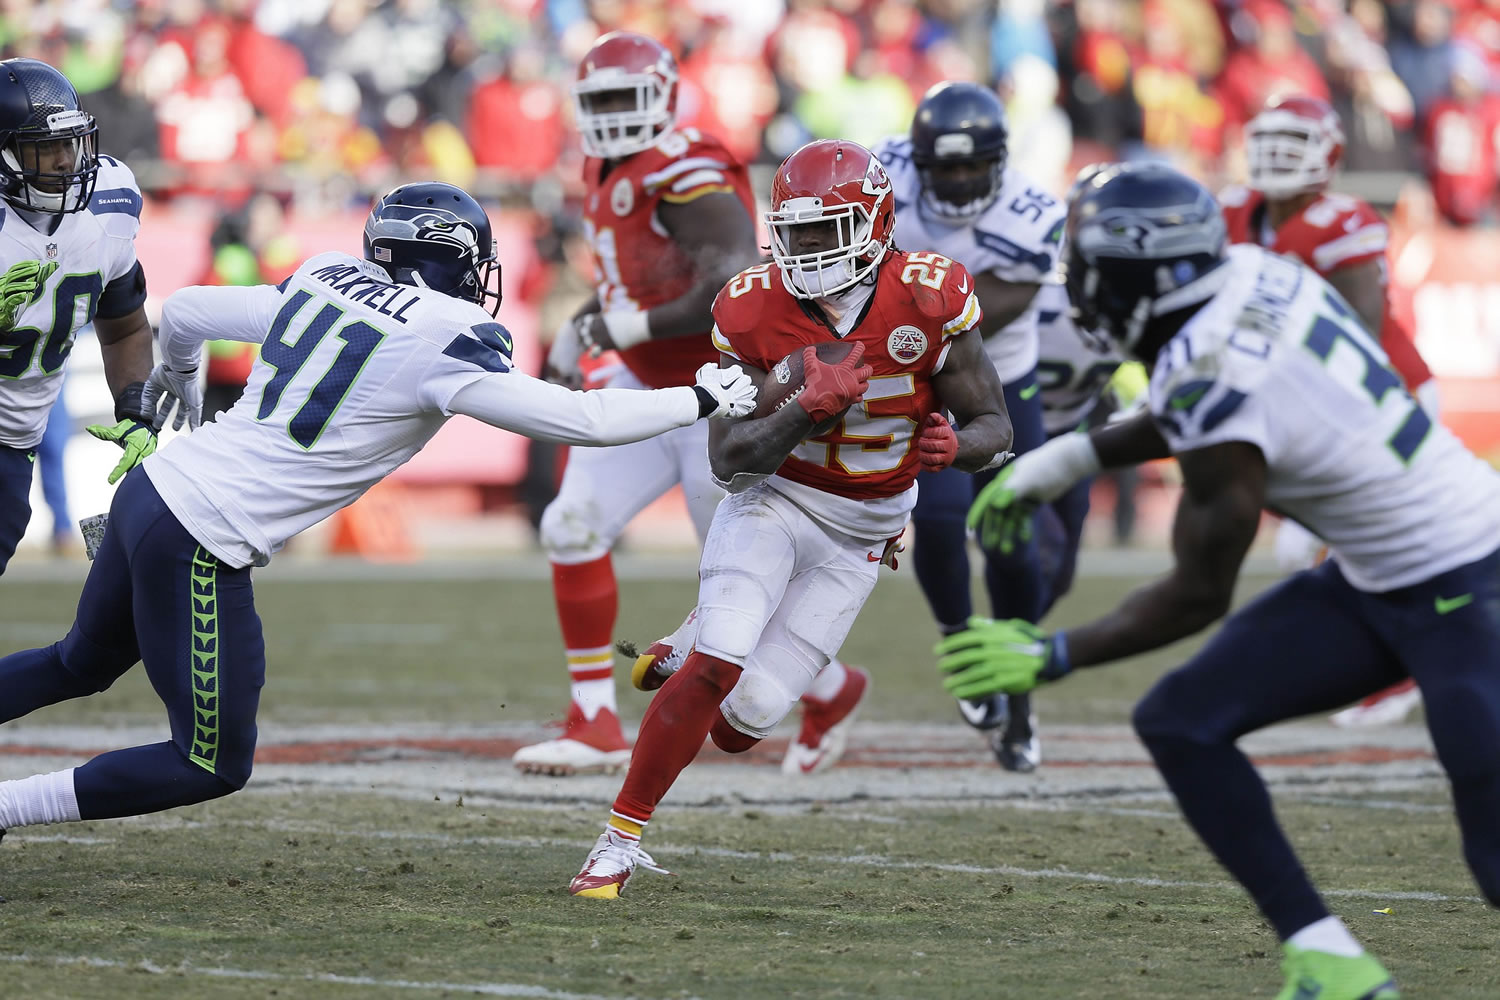 Kansas City Chiefs running back Jamaal Charles (25) carries the ball past Seattle Seahawks cornerback Byron Maxwell (41) in the second half Sunday, Nov. 16, 2014. Charles rushed for 159 yards and two touchdowns in the Chiefs' 24-20 win.